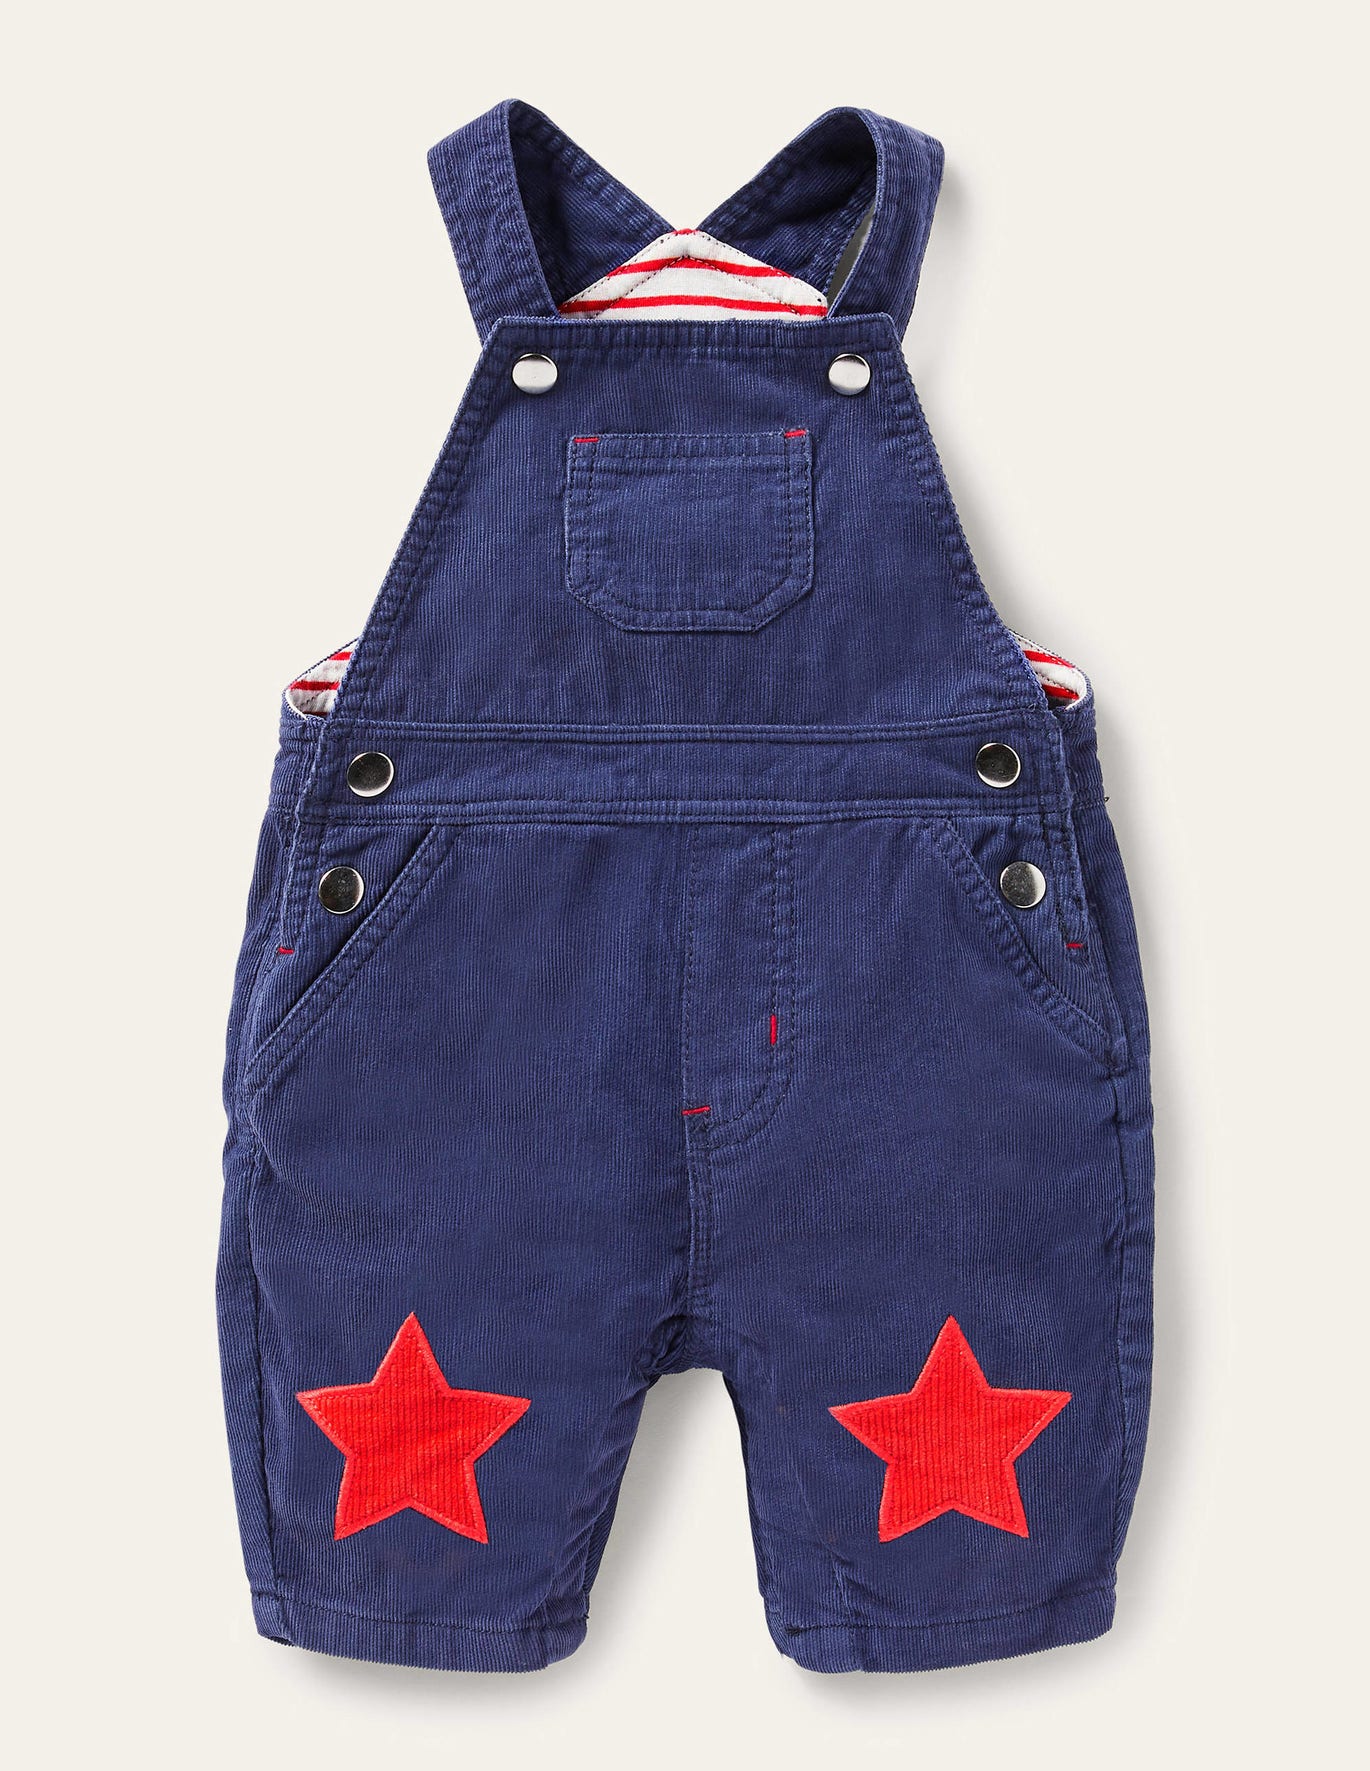 Boden Cord Overalls - Starboard Blue